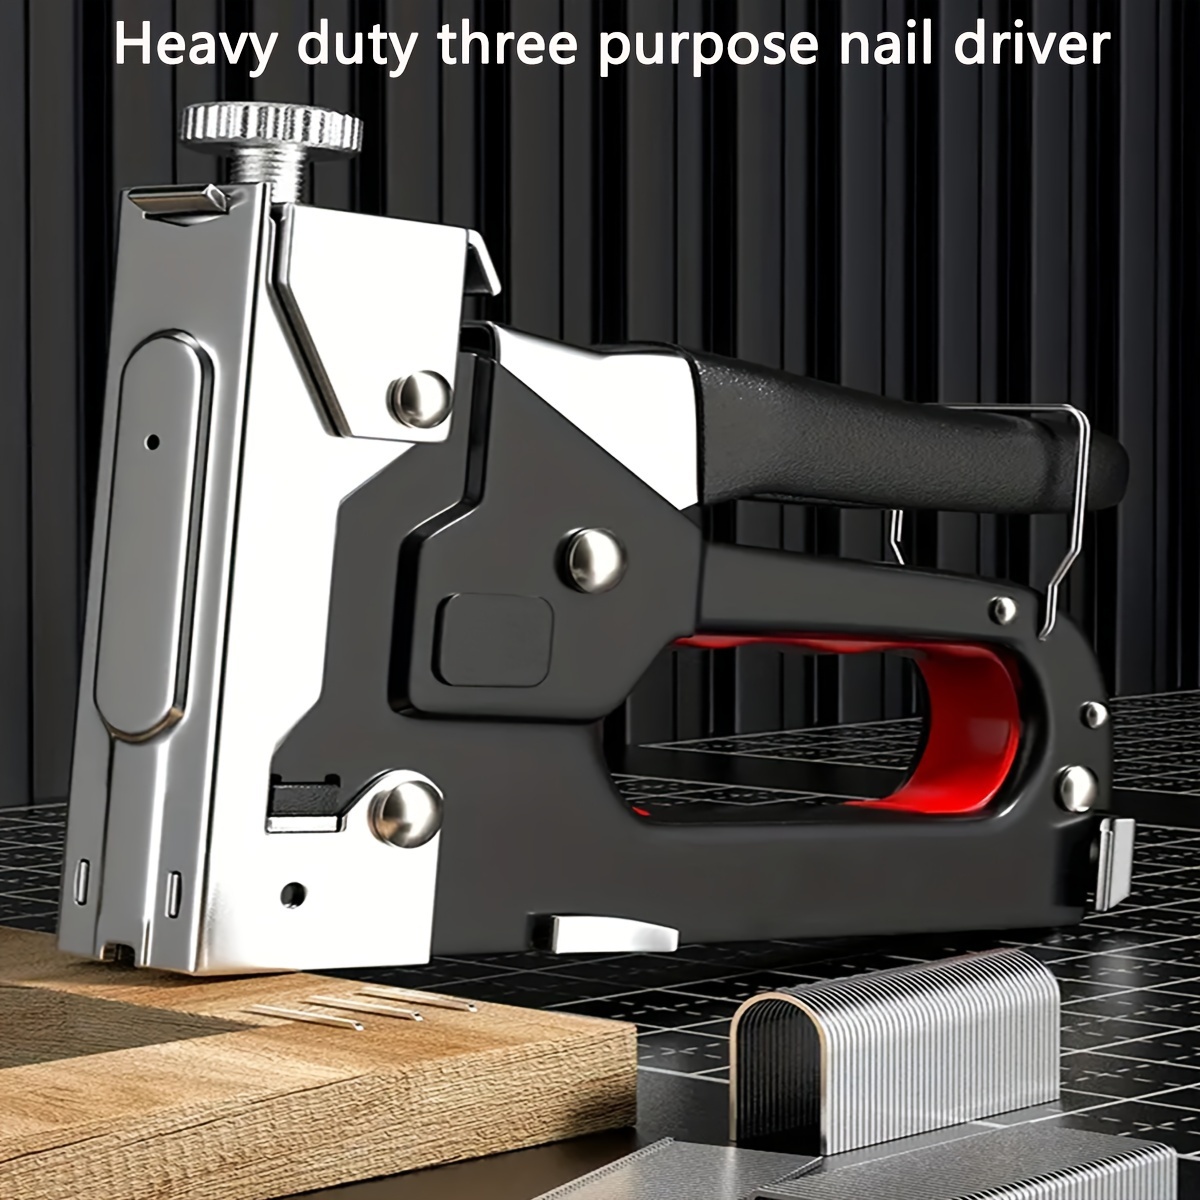 

1set Heavy-duty 3-in-1 Stapler For Diy Home Decor, Furniture, And Wood Frames -multi-tool Hand Nail Gun With Bandage Pliers Set With 600 Staples, Manual Power Adjustment Stapler Gun